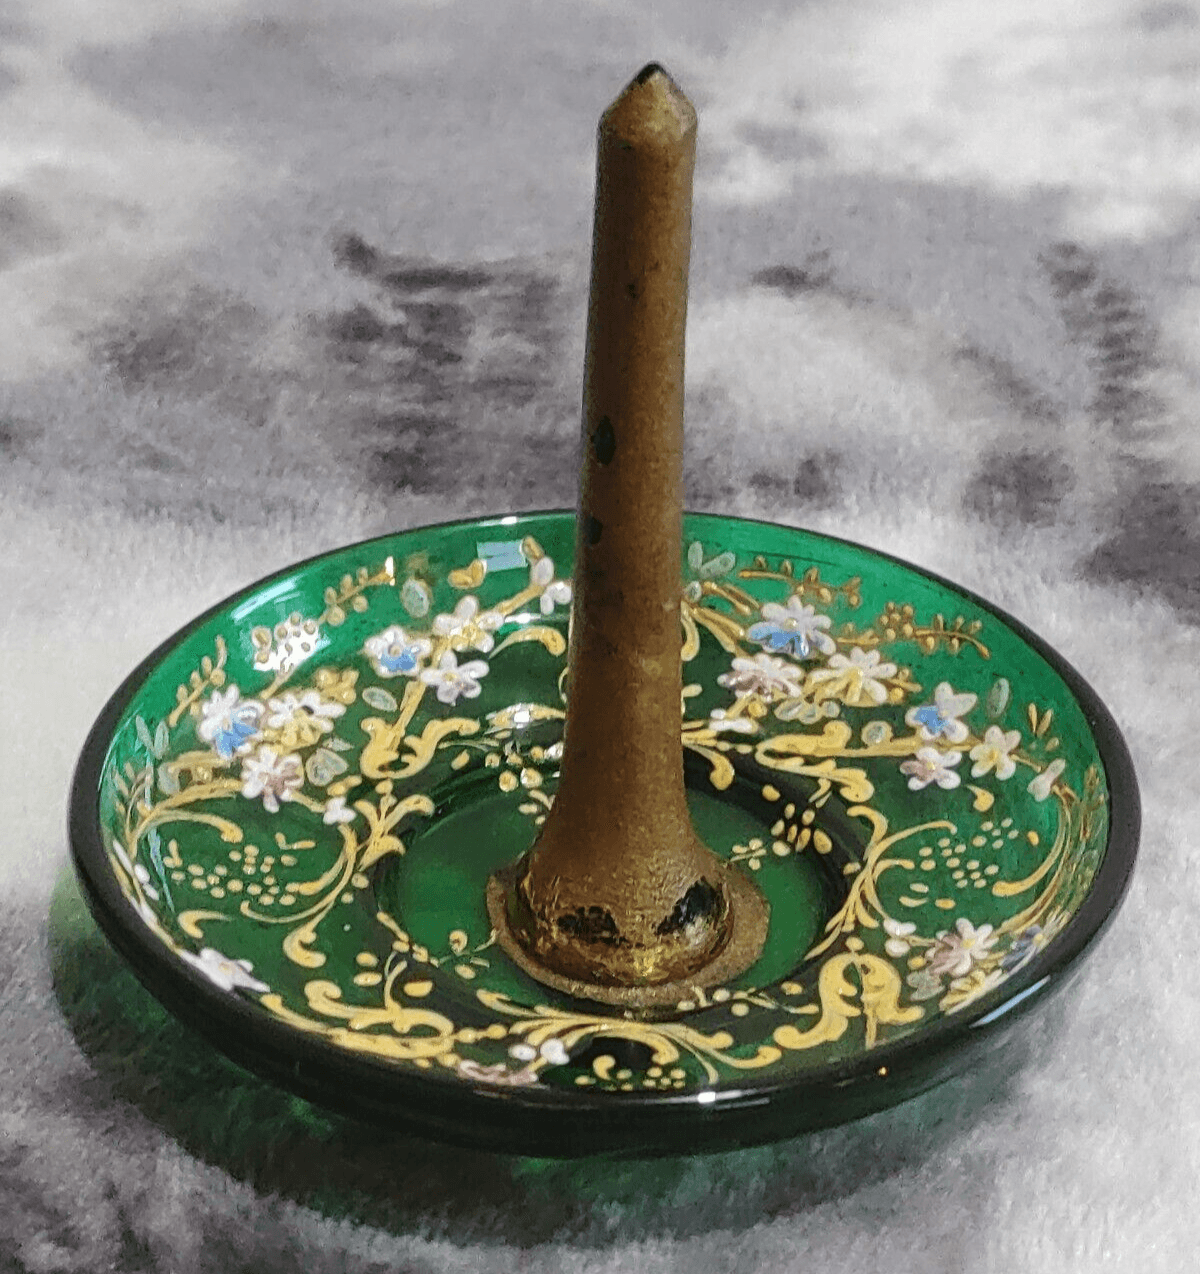 Antique Bohemian Czech Moser Green Glass Enamel Jewellery Ring Stand Holder - Tommy's Treasure